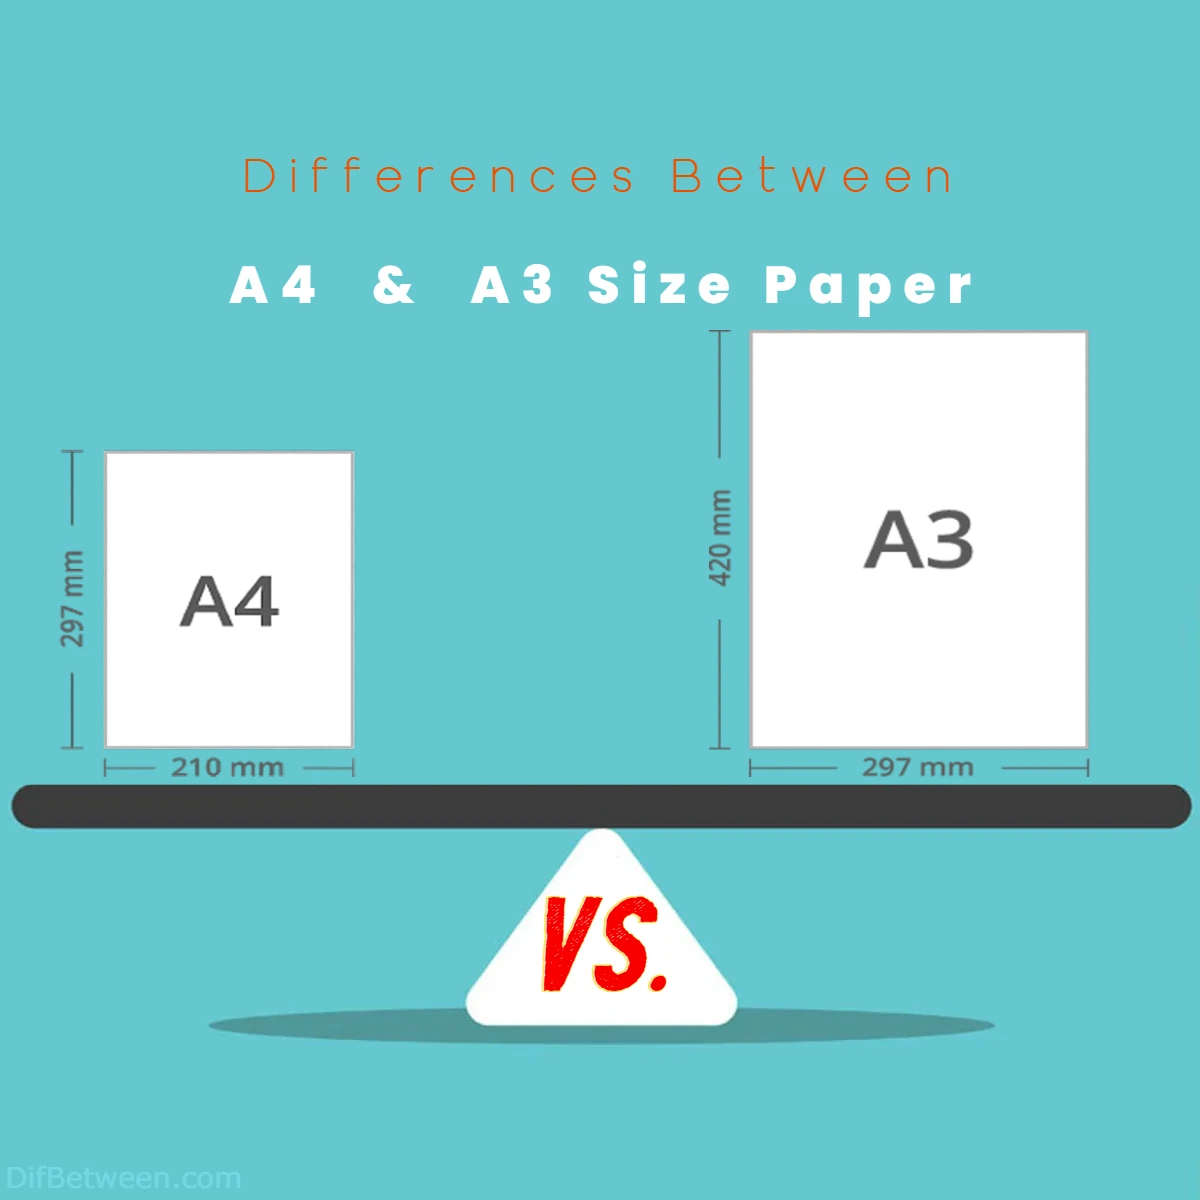 Differences Between A4 vs A3 Size Paper